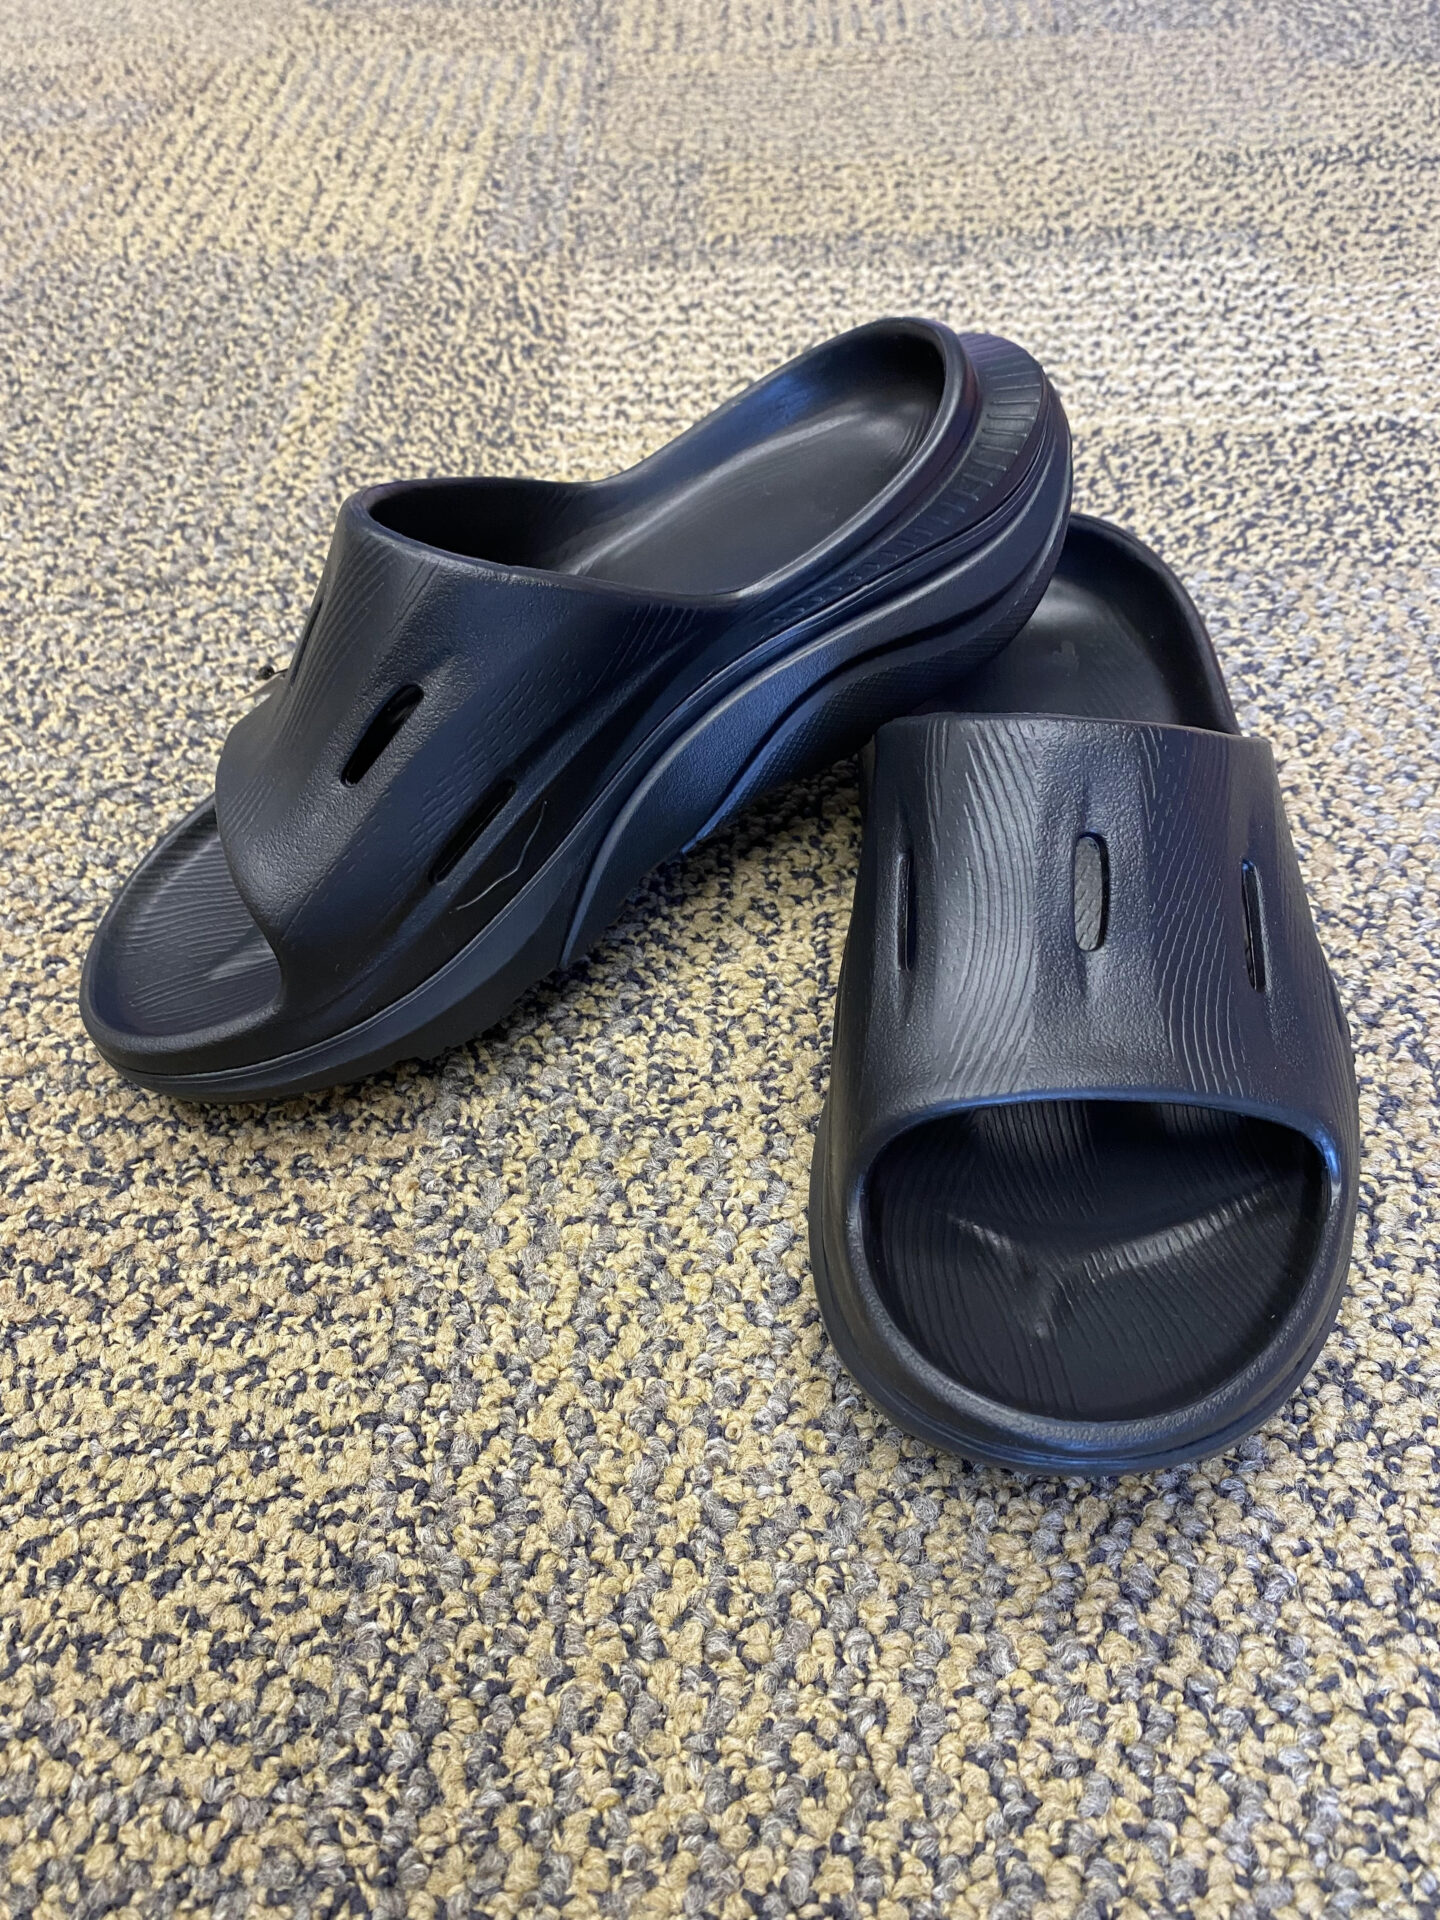 Men's Footwear - Niagara Foot Care Clinic and Orthotic Centre